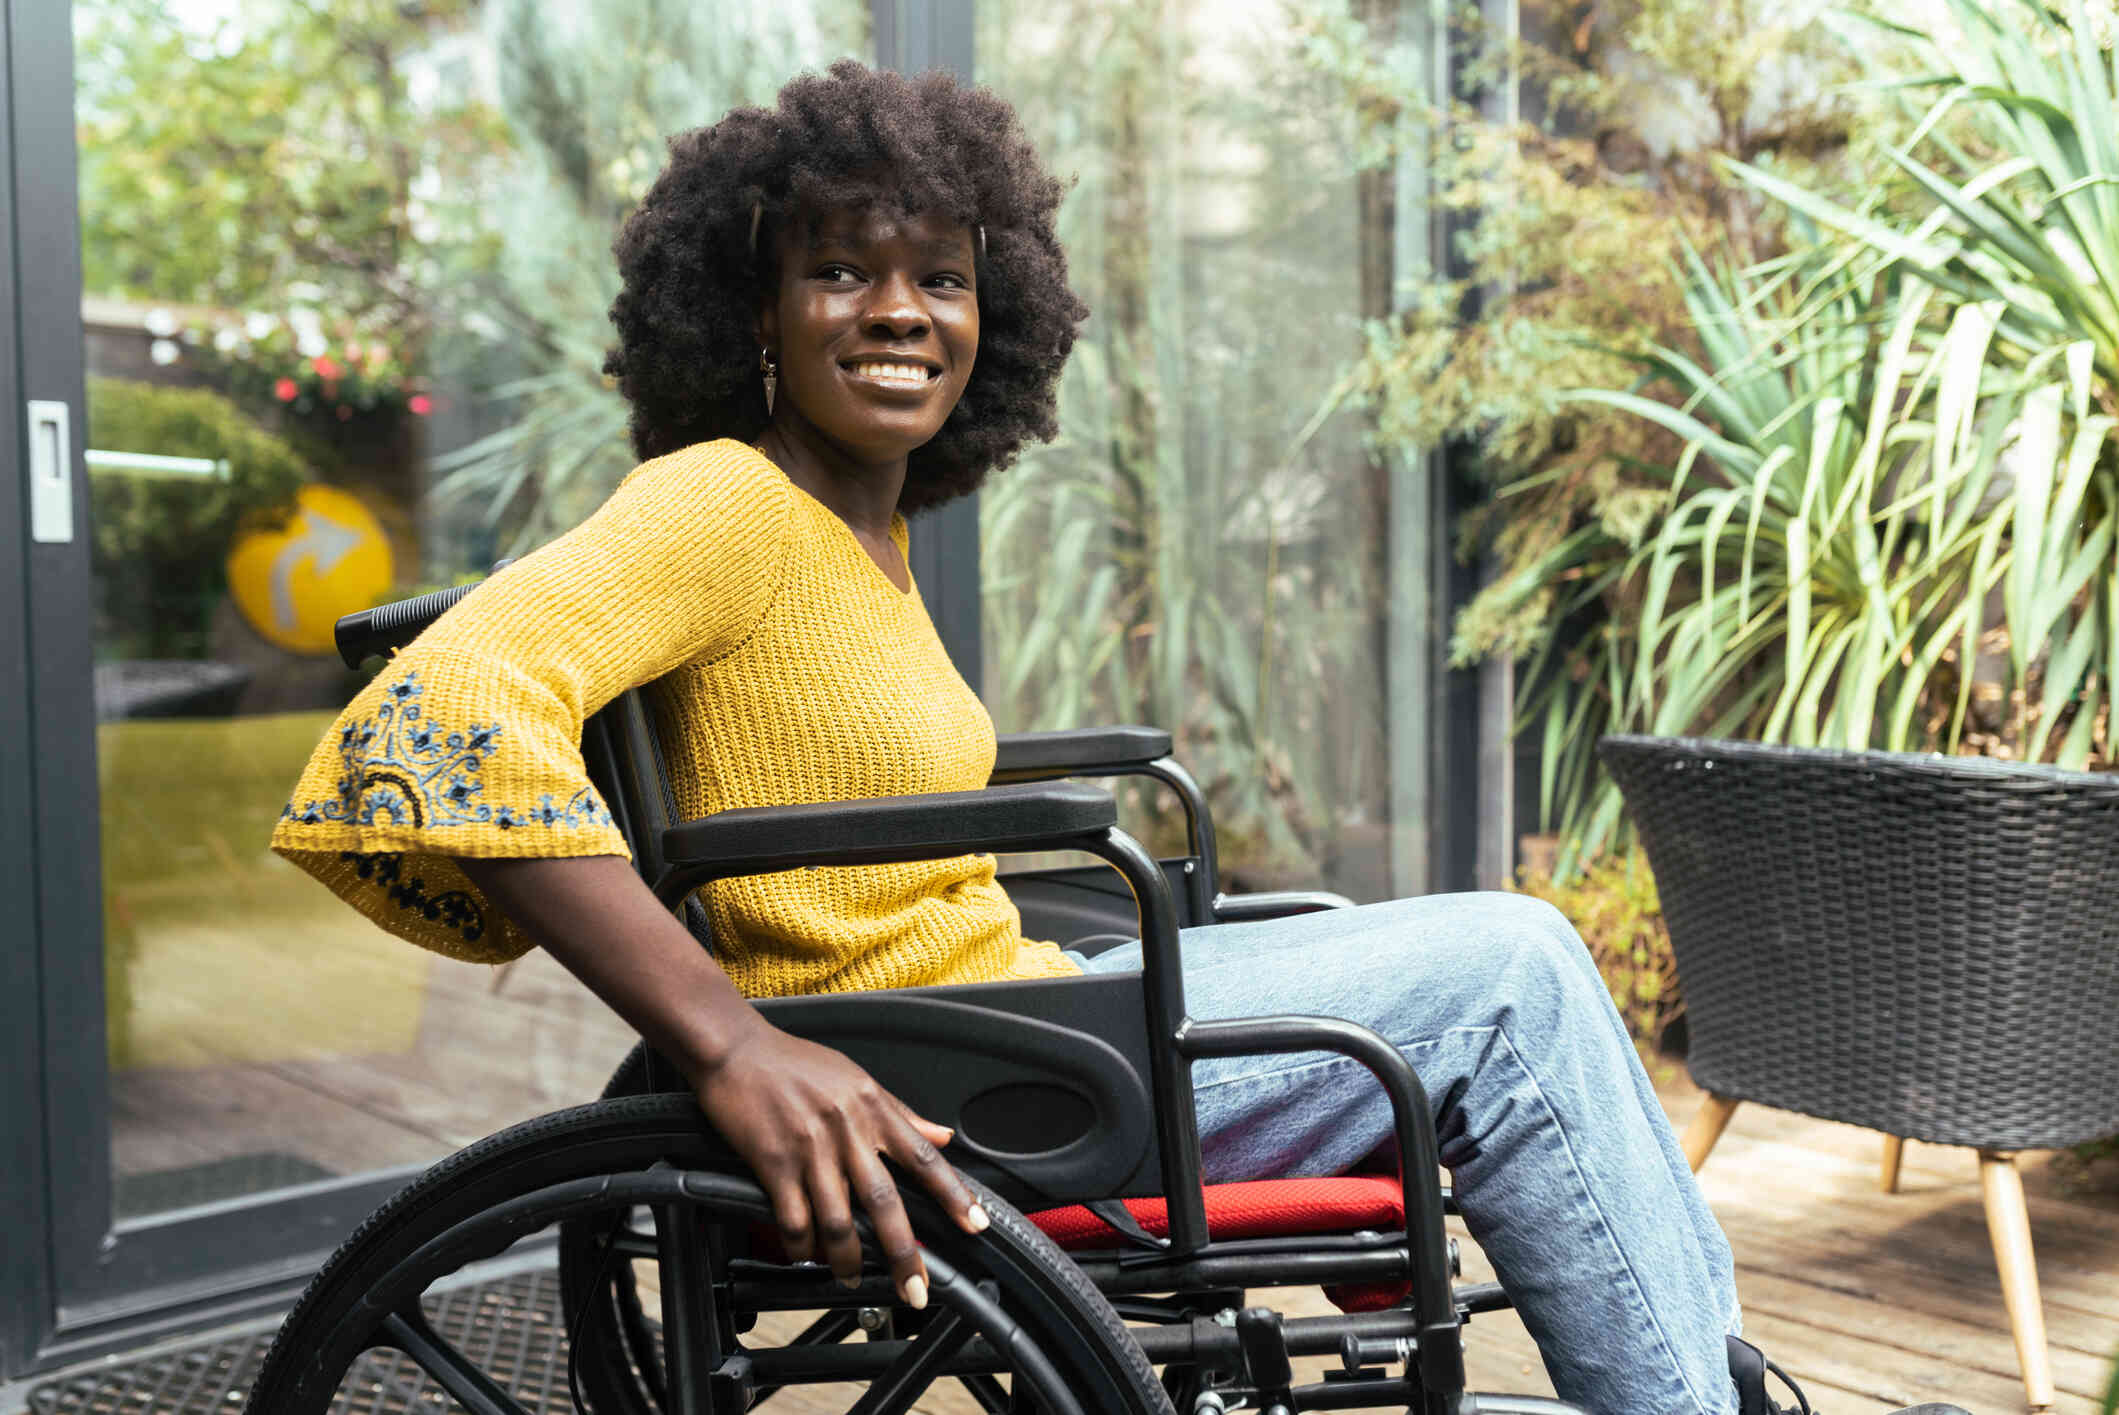 A woman in a yellow shirt sits outside in her wheelchair next to some plants while gazing off with a smiles.